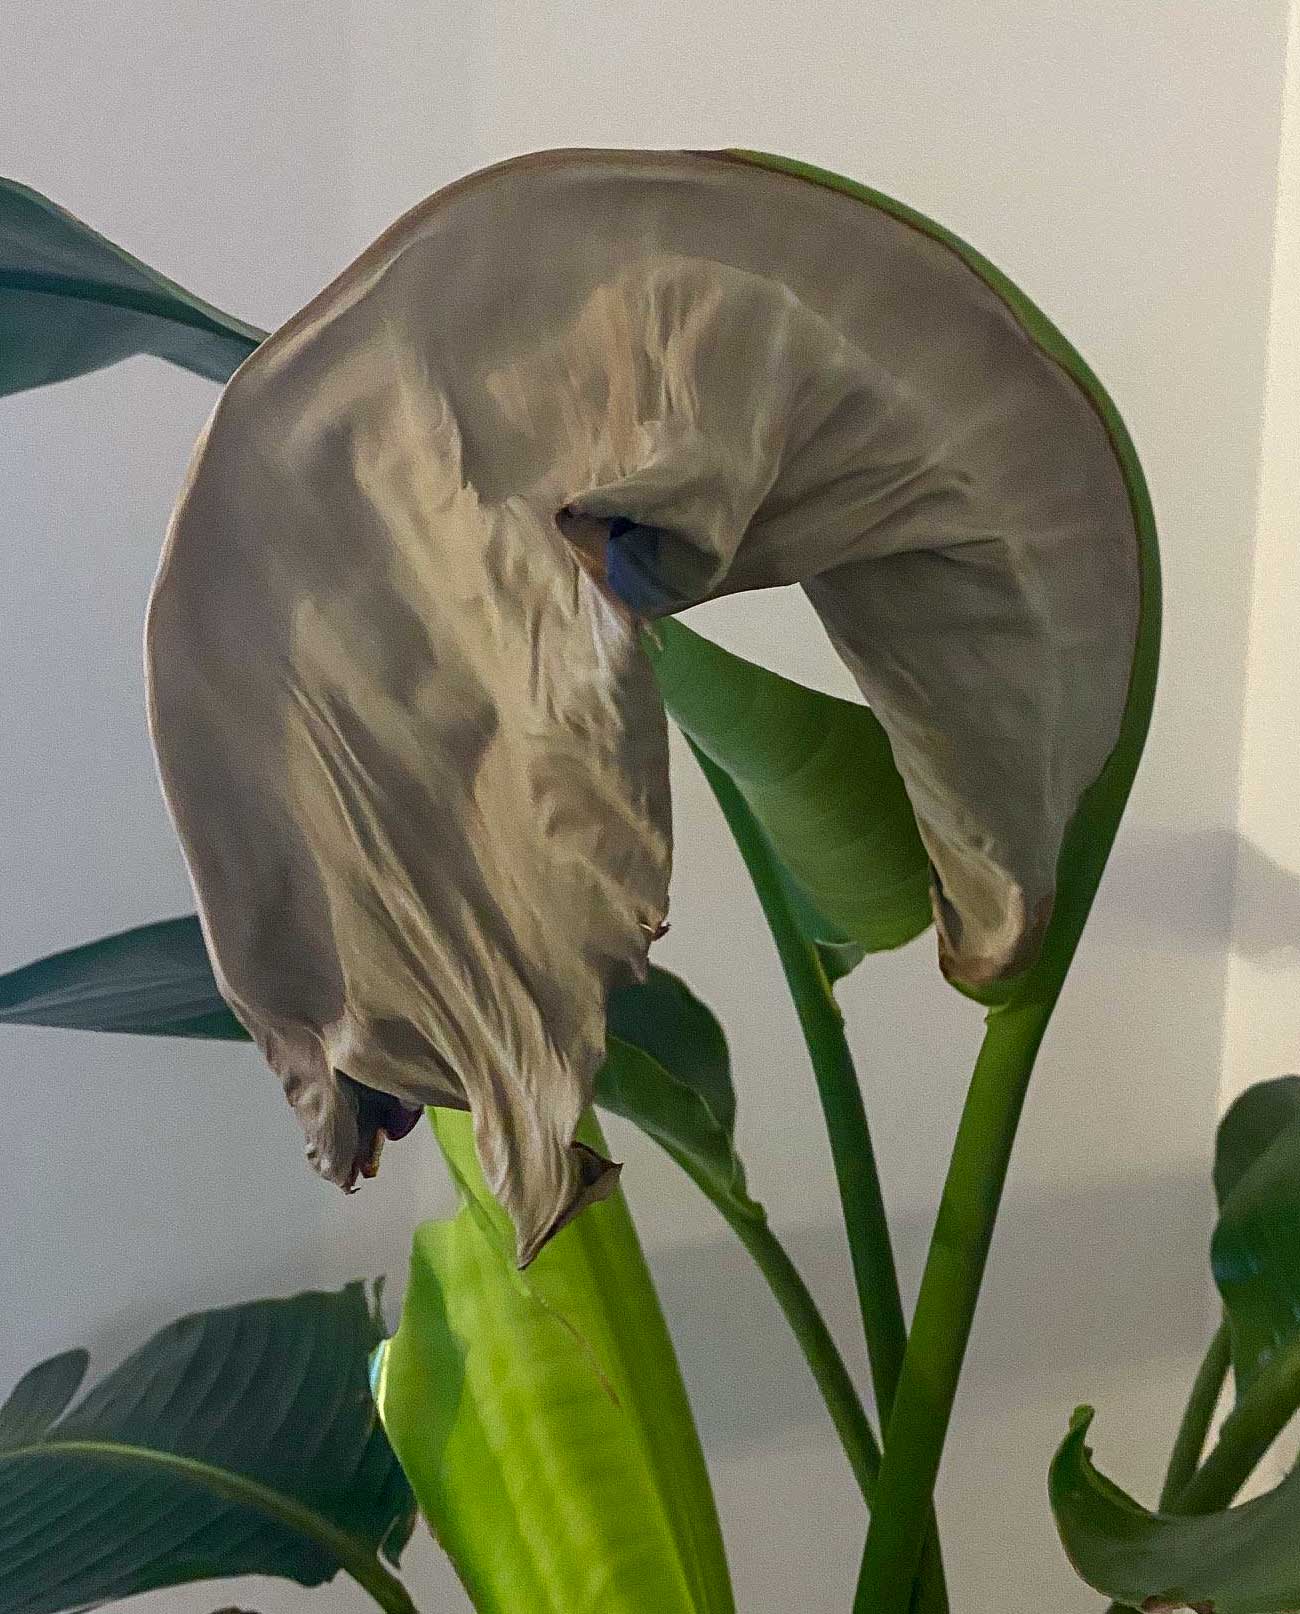 Curling brown leaf of Bird of Paradise due to lack of light. 